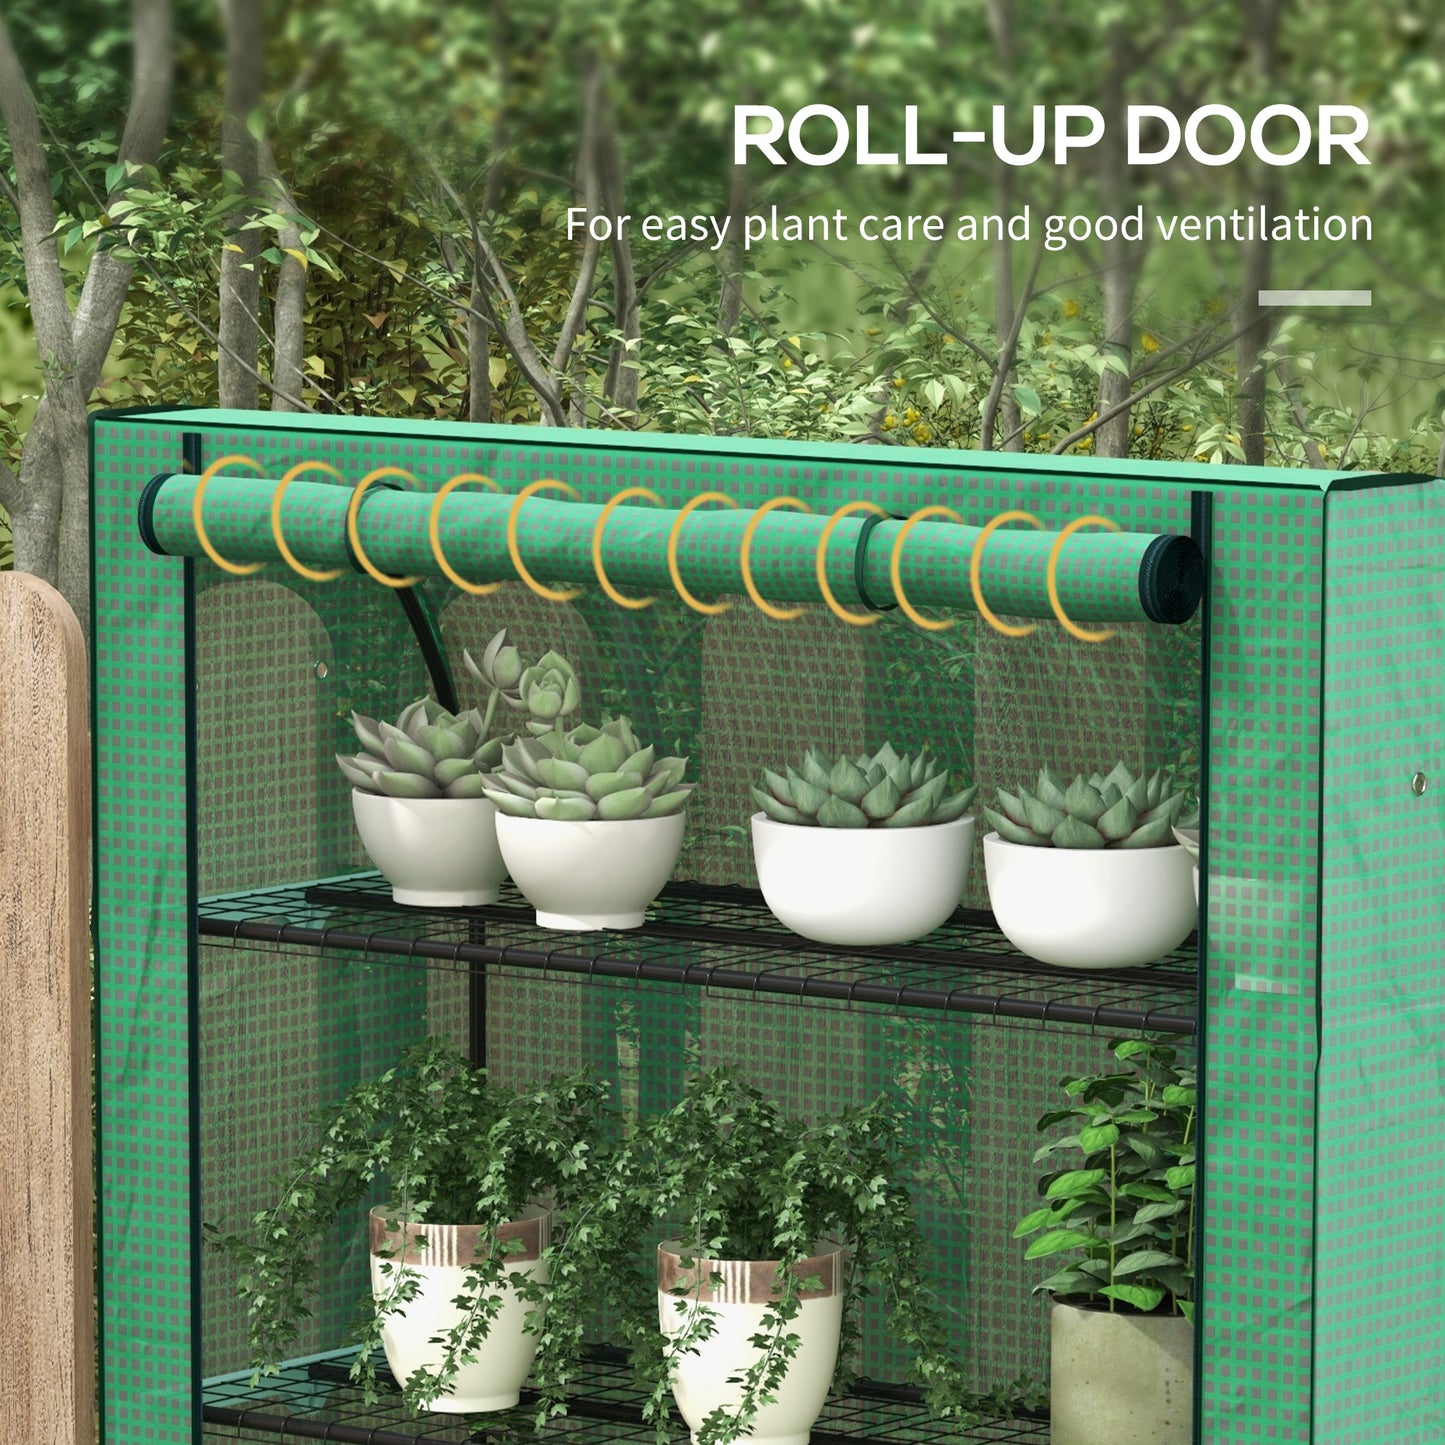 Outsunny Portable Mini Greenhouse: 4 Tier with PE Reinforced Cover and Roll-up Door, Green, 170H x 120W x 50Dcm